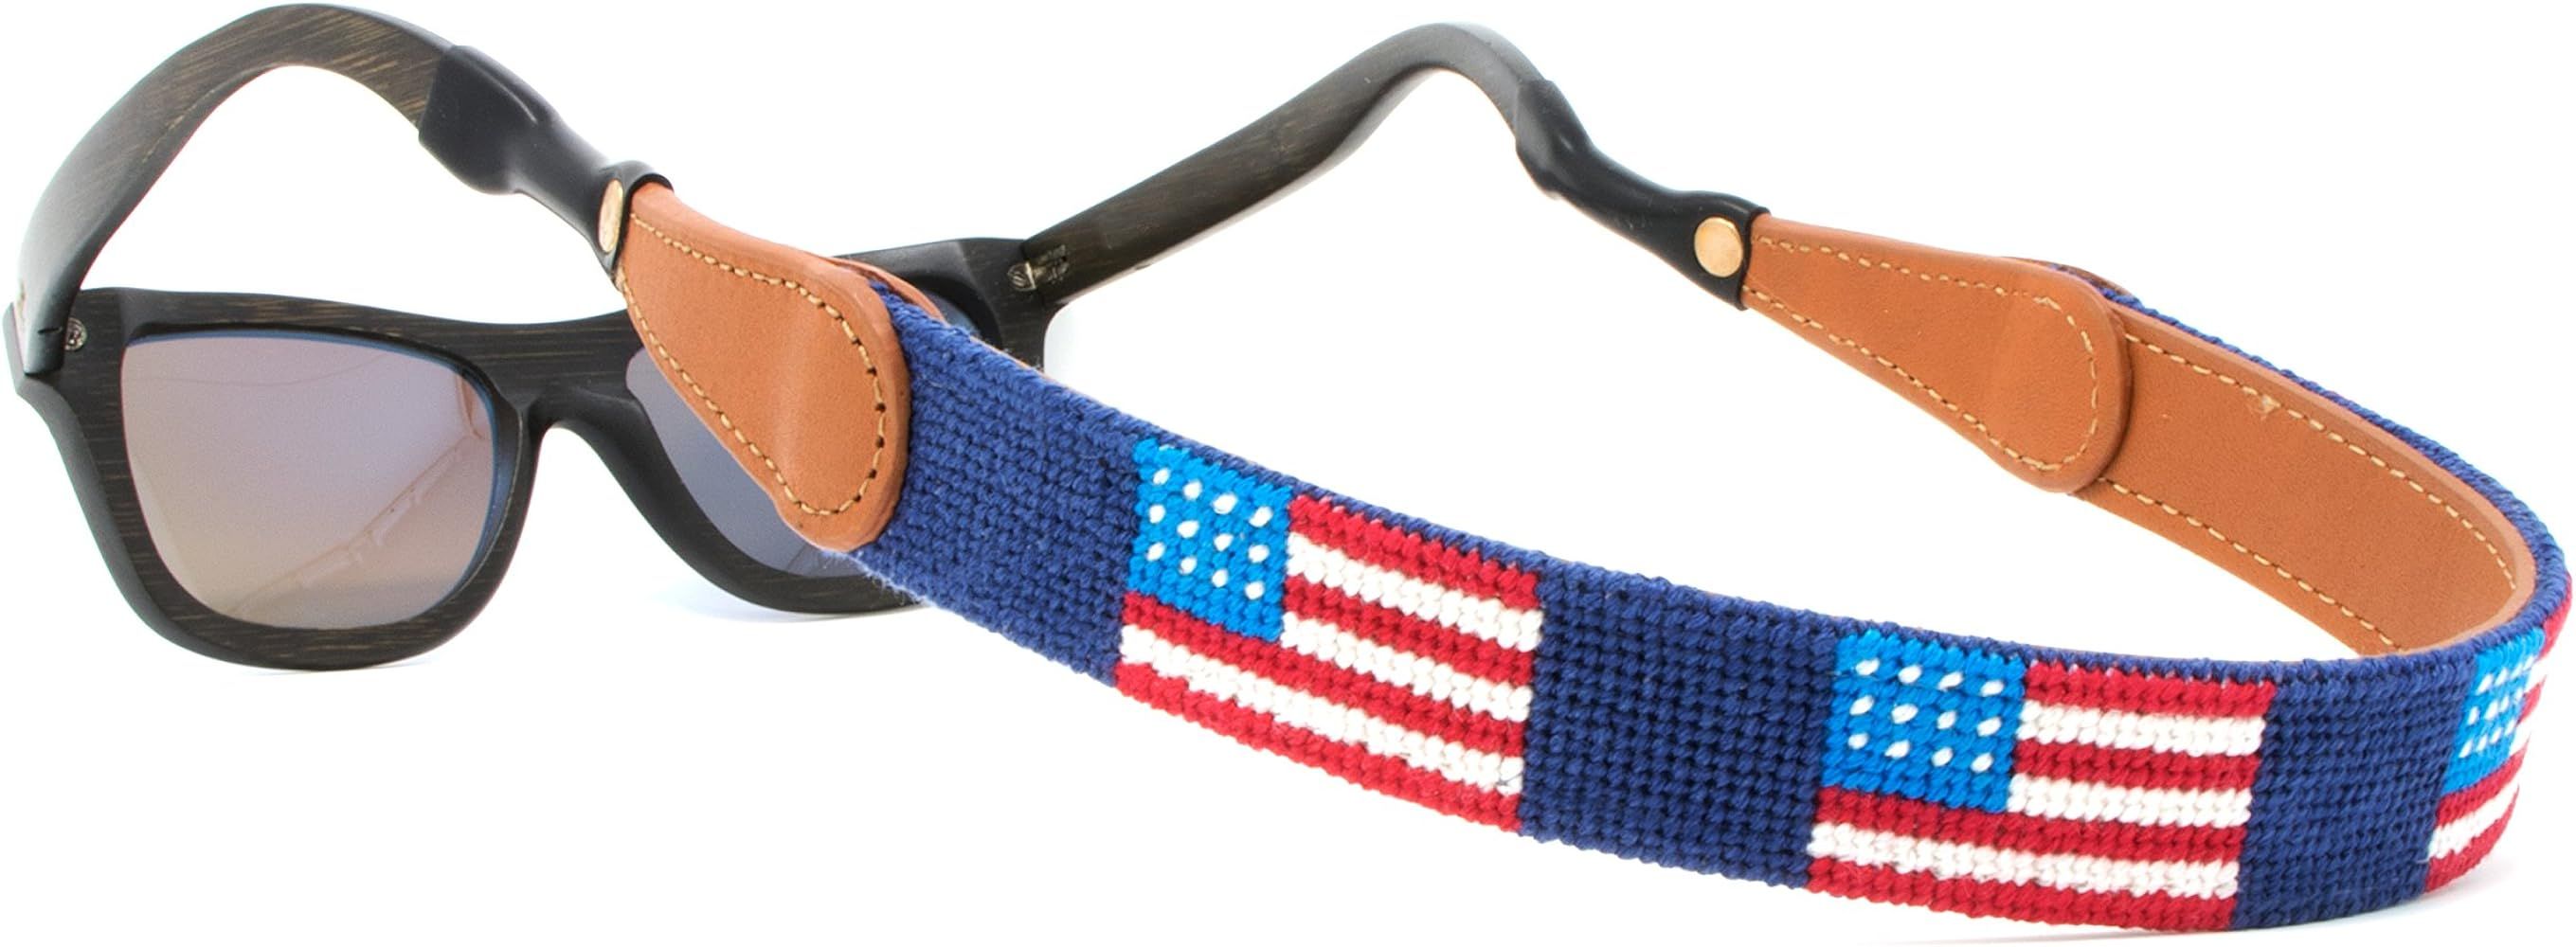 Leather Hand-Stitched Needlepoint Sunglass Strap Retainer by Huck Venture | Amazon (US)